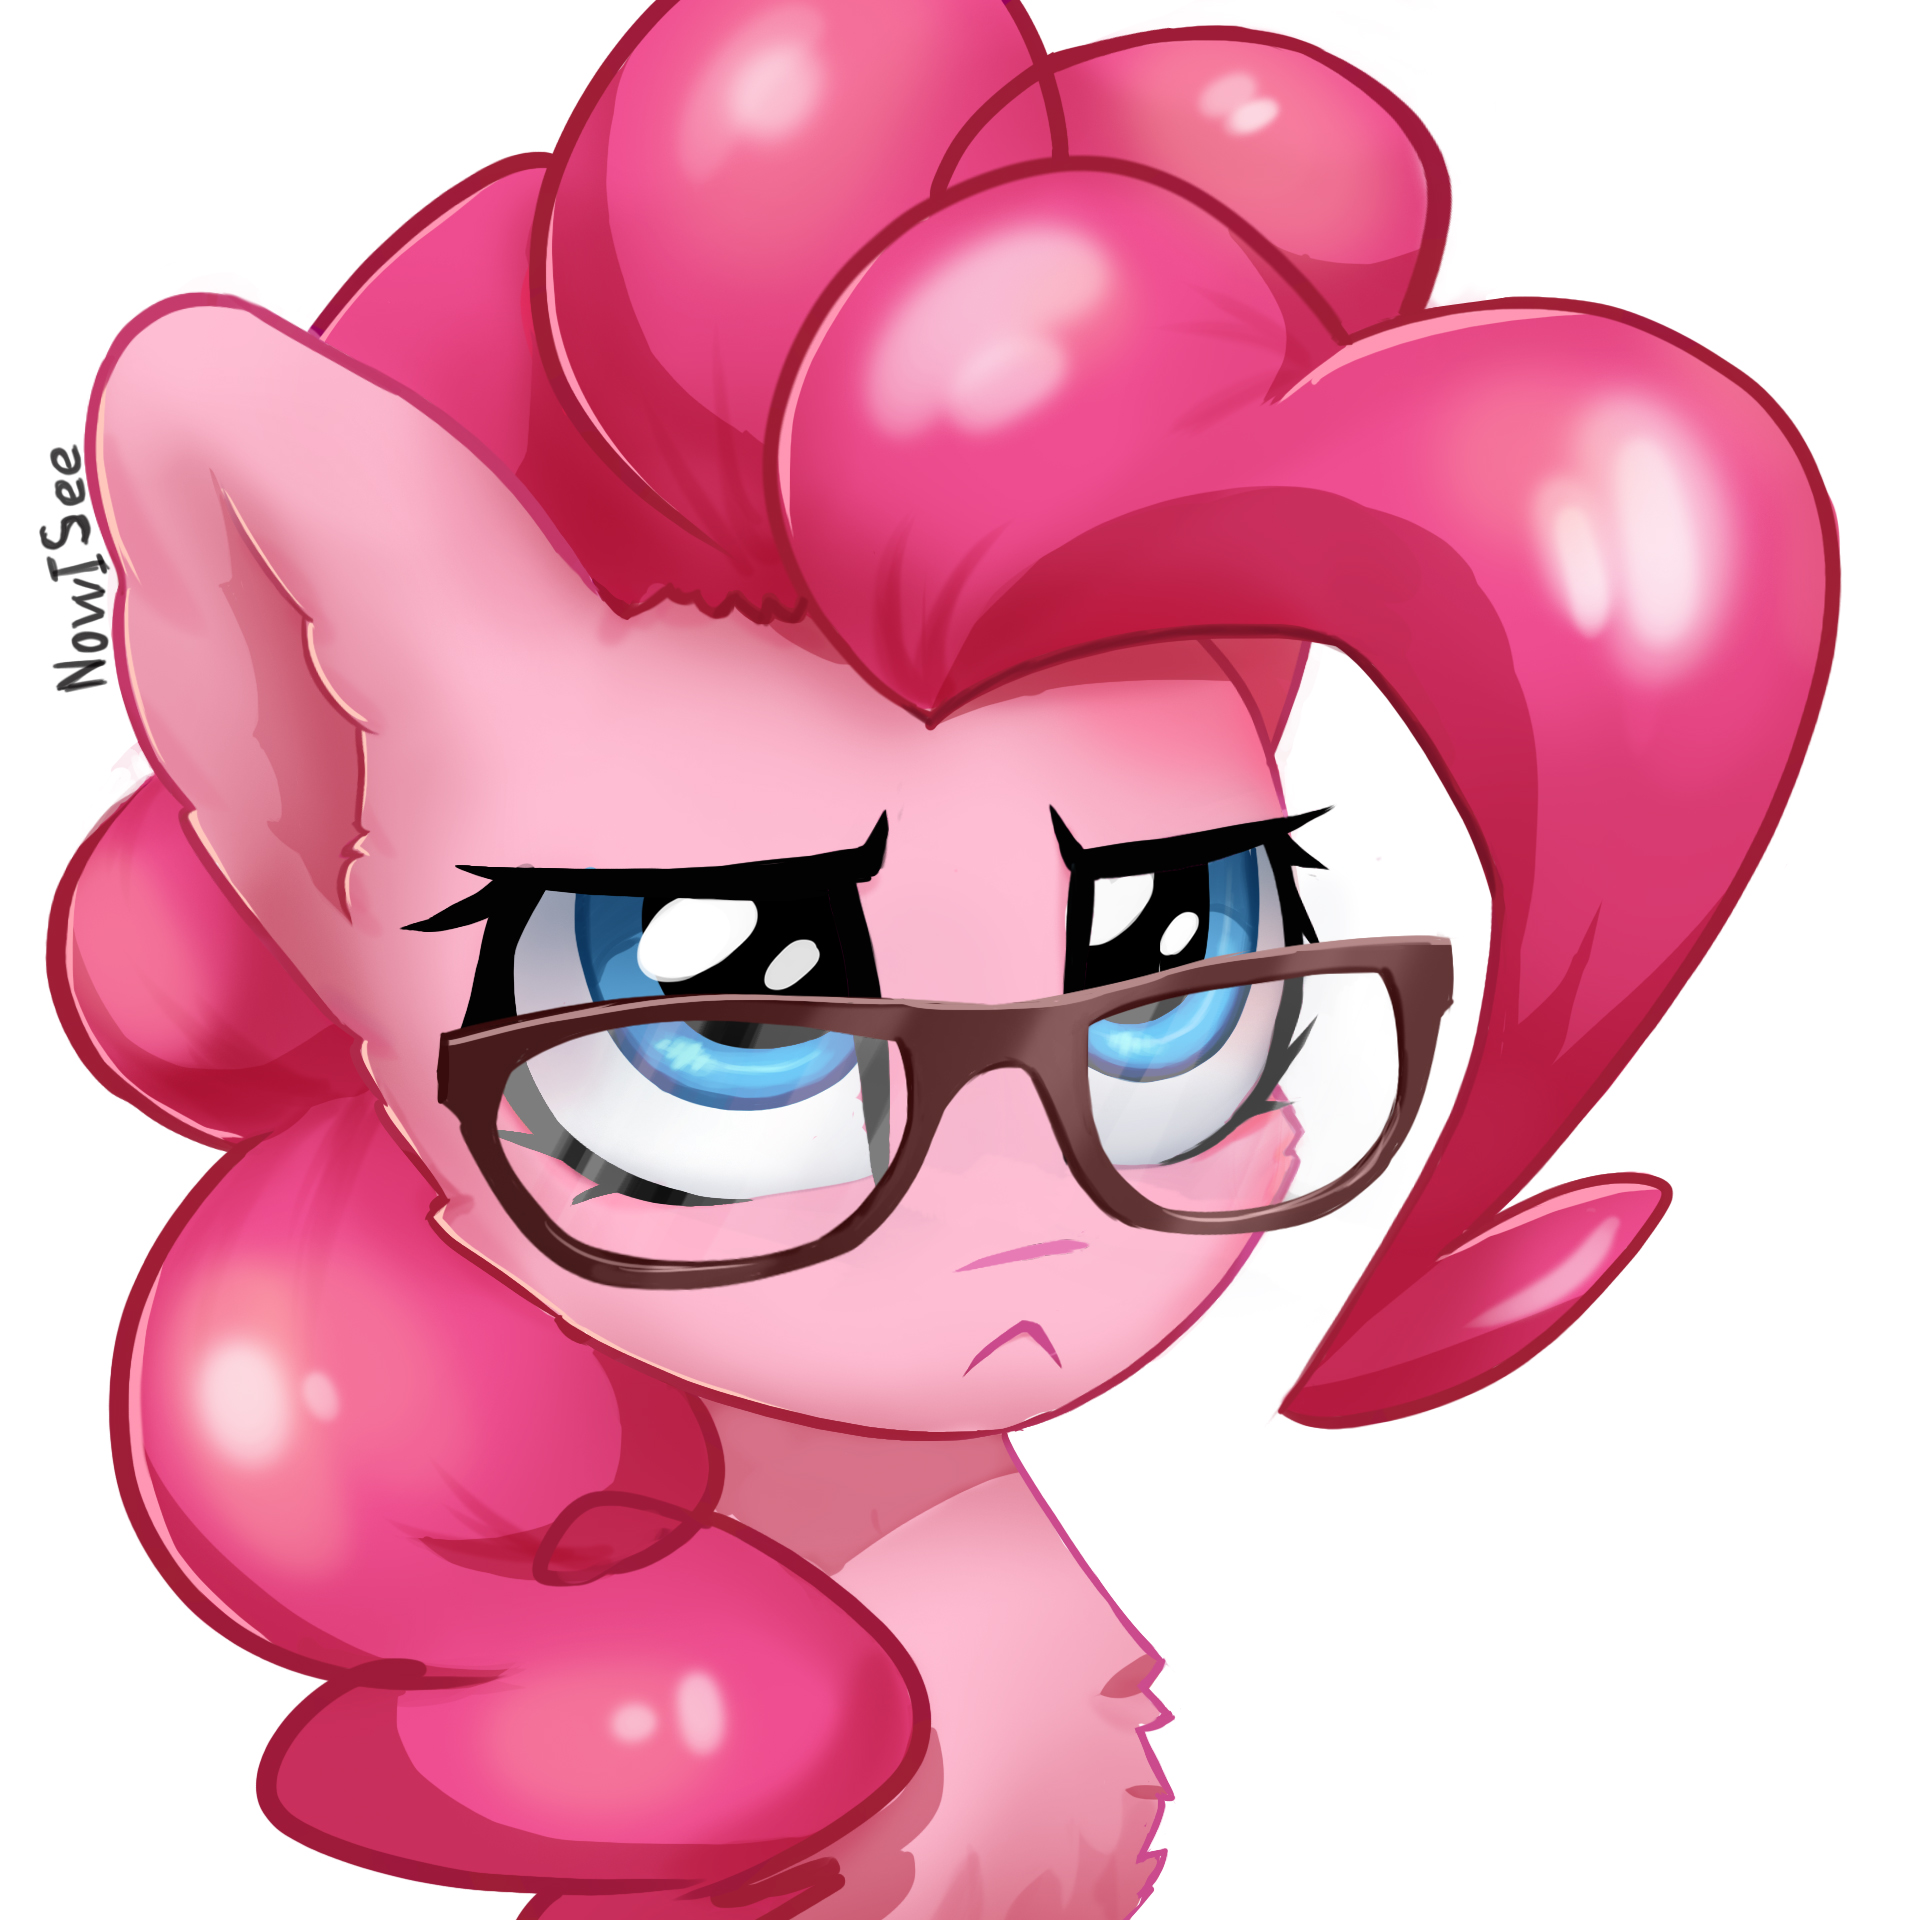 1449342__safe_artist-colon-inowiseei_pinkie+pie_-colon-%3C_bust_cute_diapinkes_earth+pony_female_glasses_mare_pony_portrait_serious_serious+face_simple.jpeg